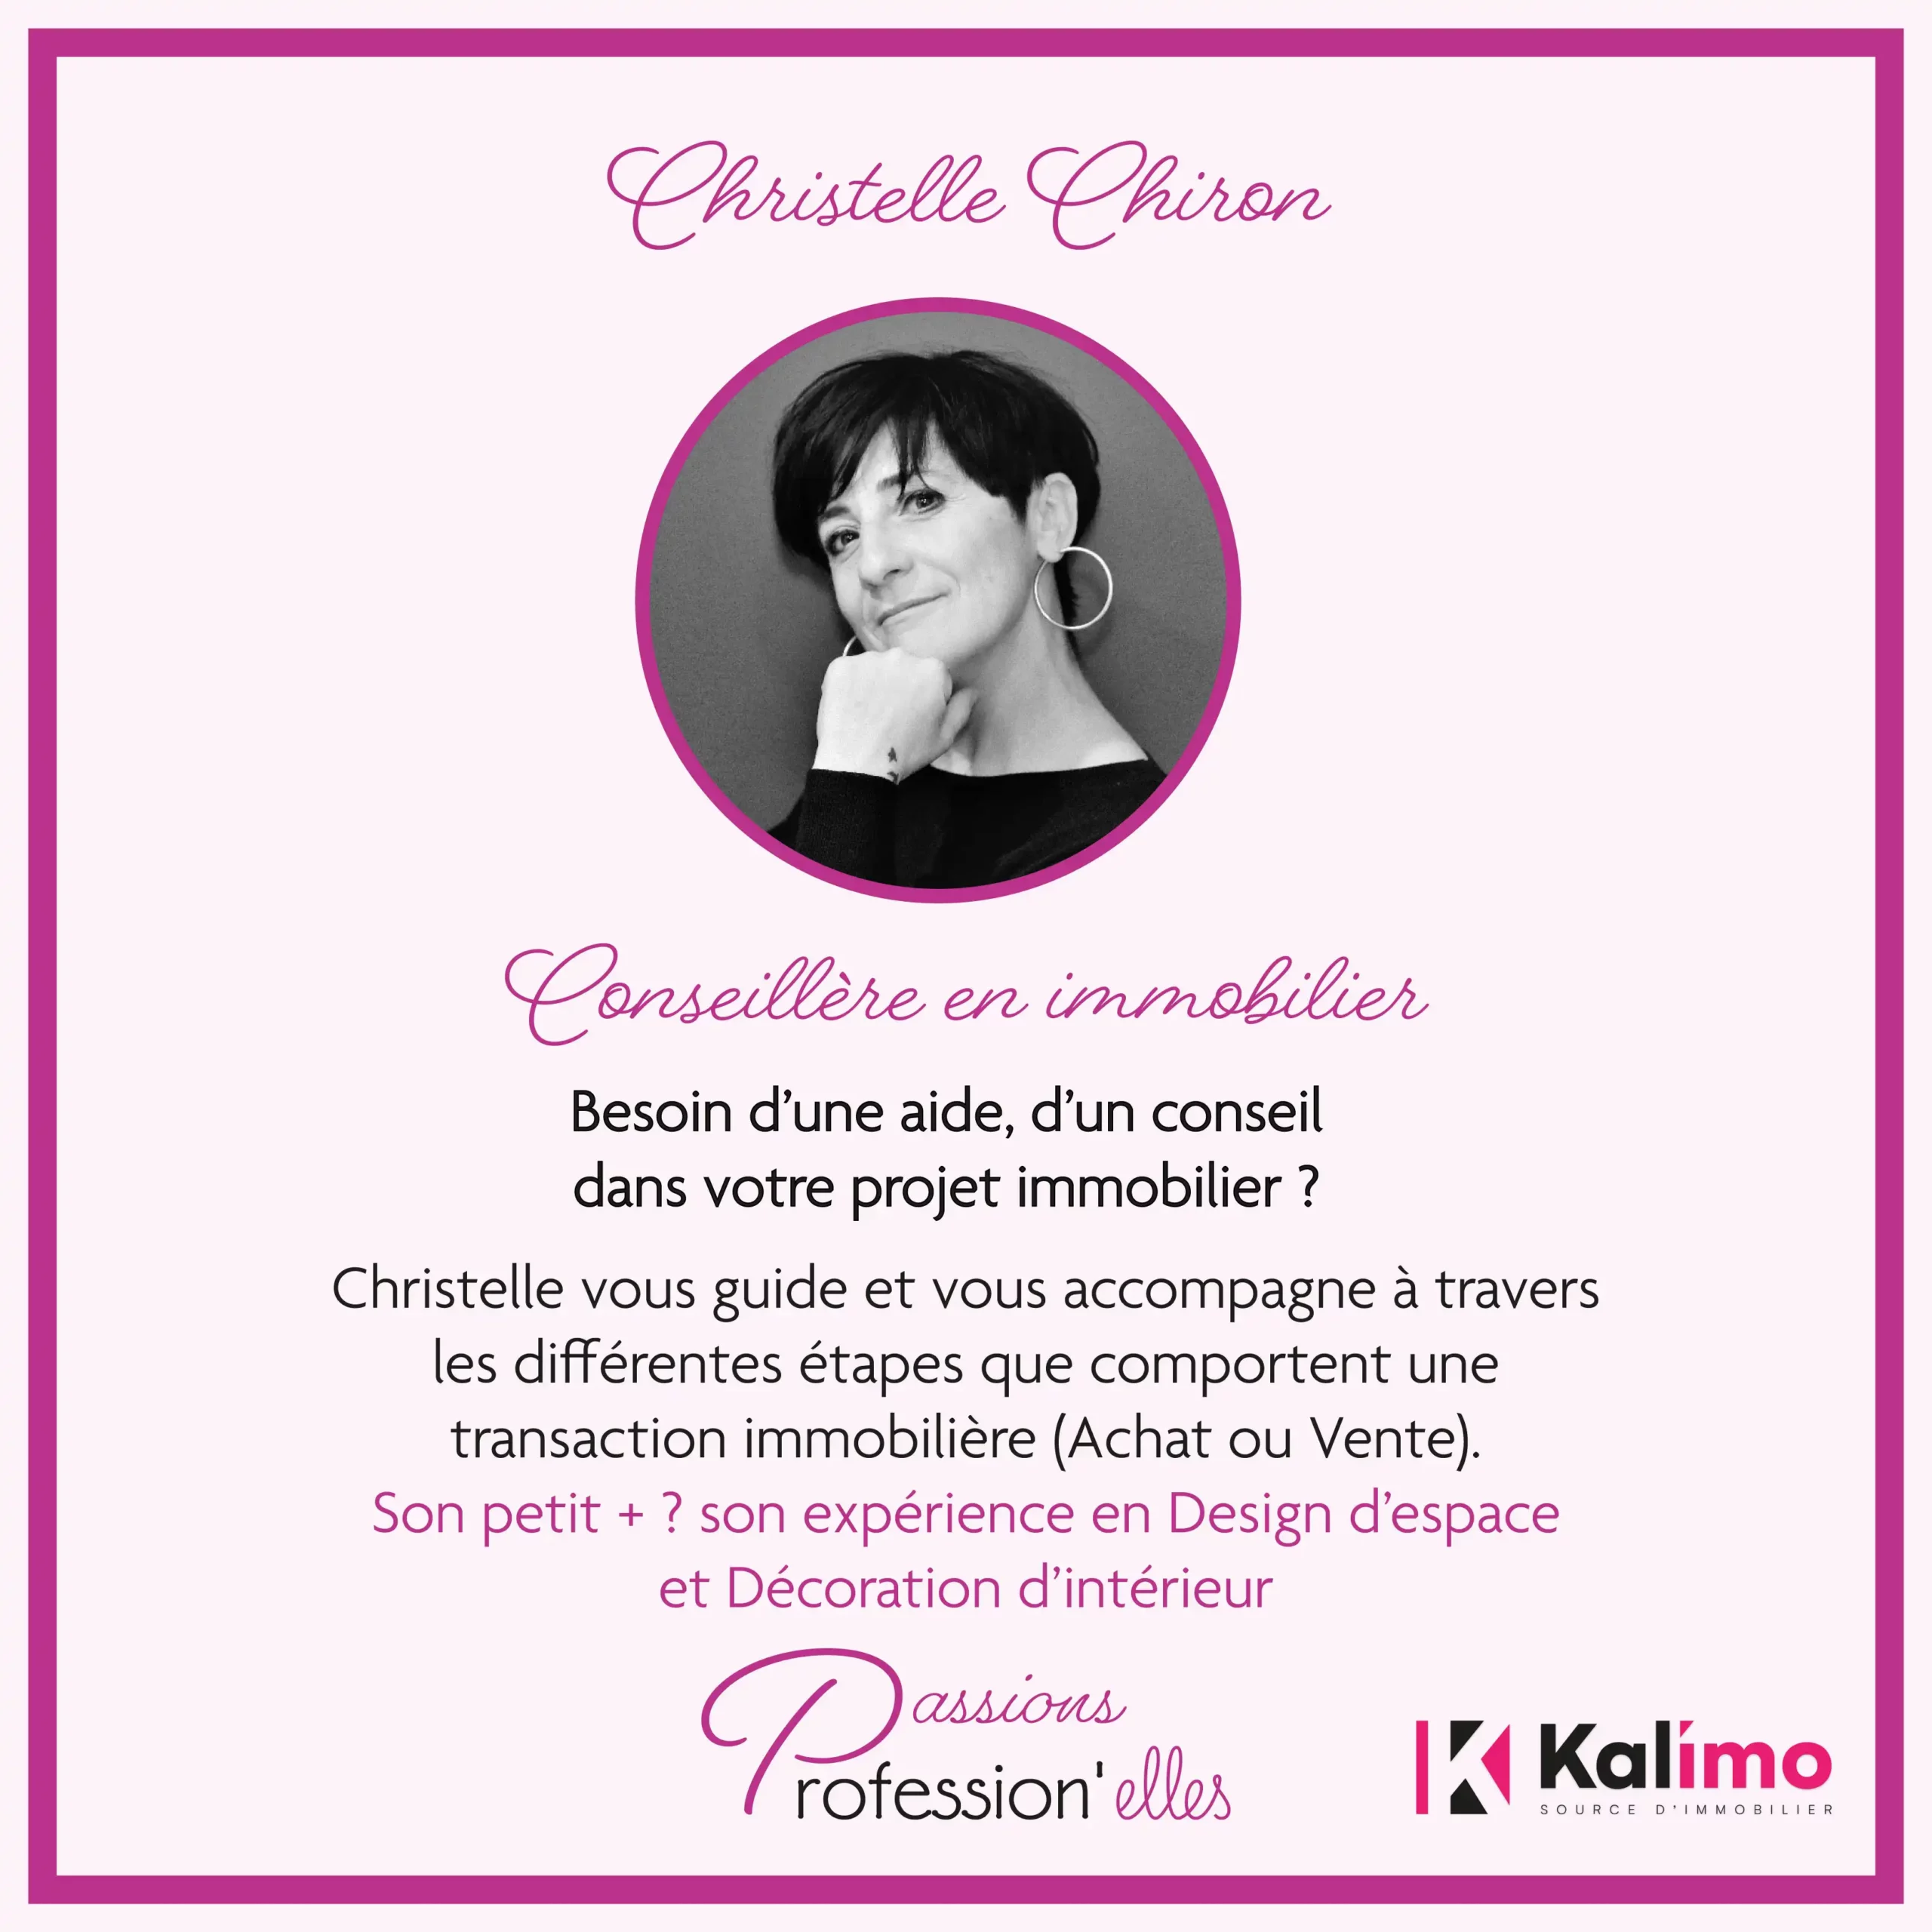 Christelle Chiron, conseillère immobilier